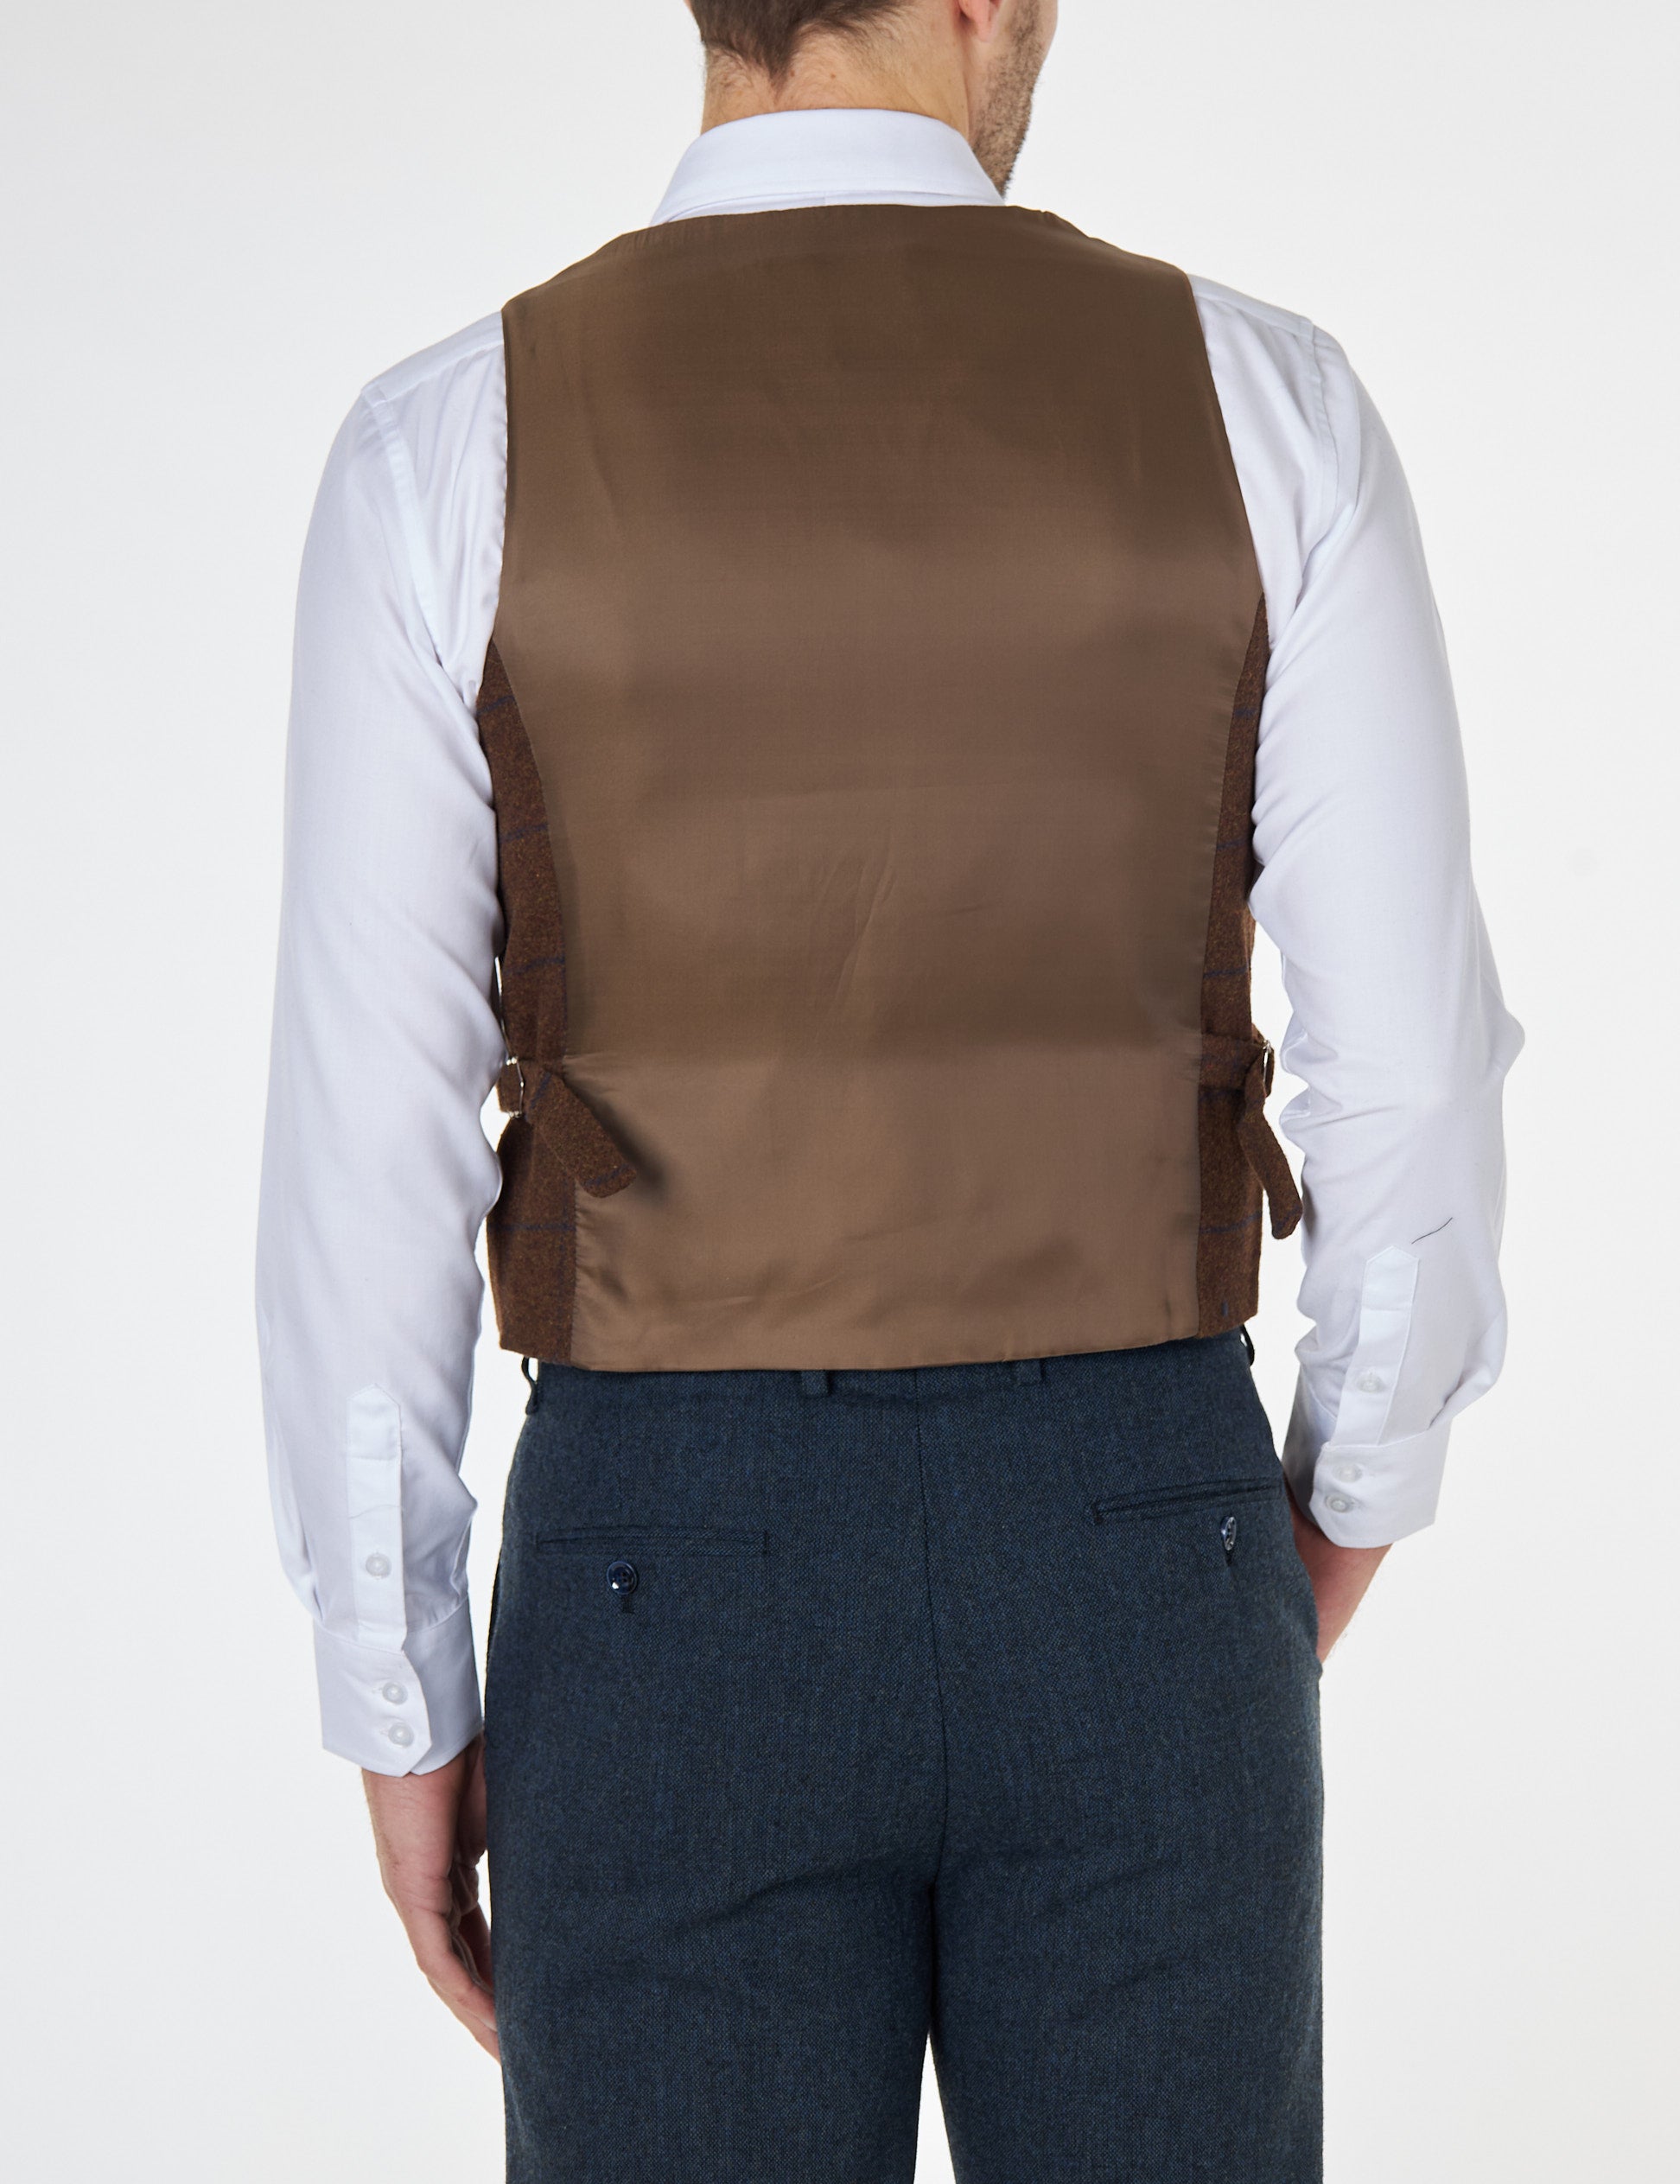 JUDE TWEED CHECK DOUBLE BREASTED WAISTCOAT